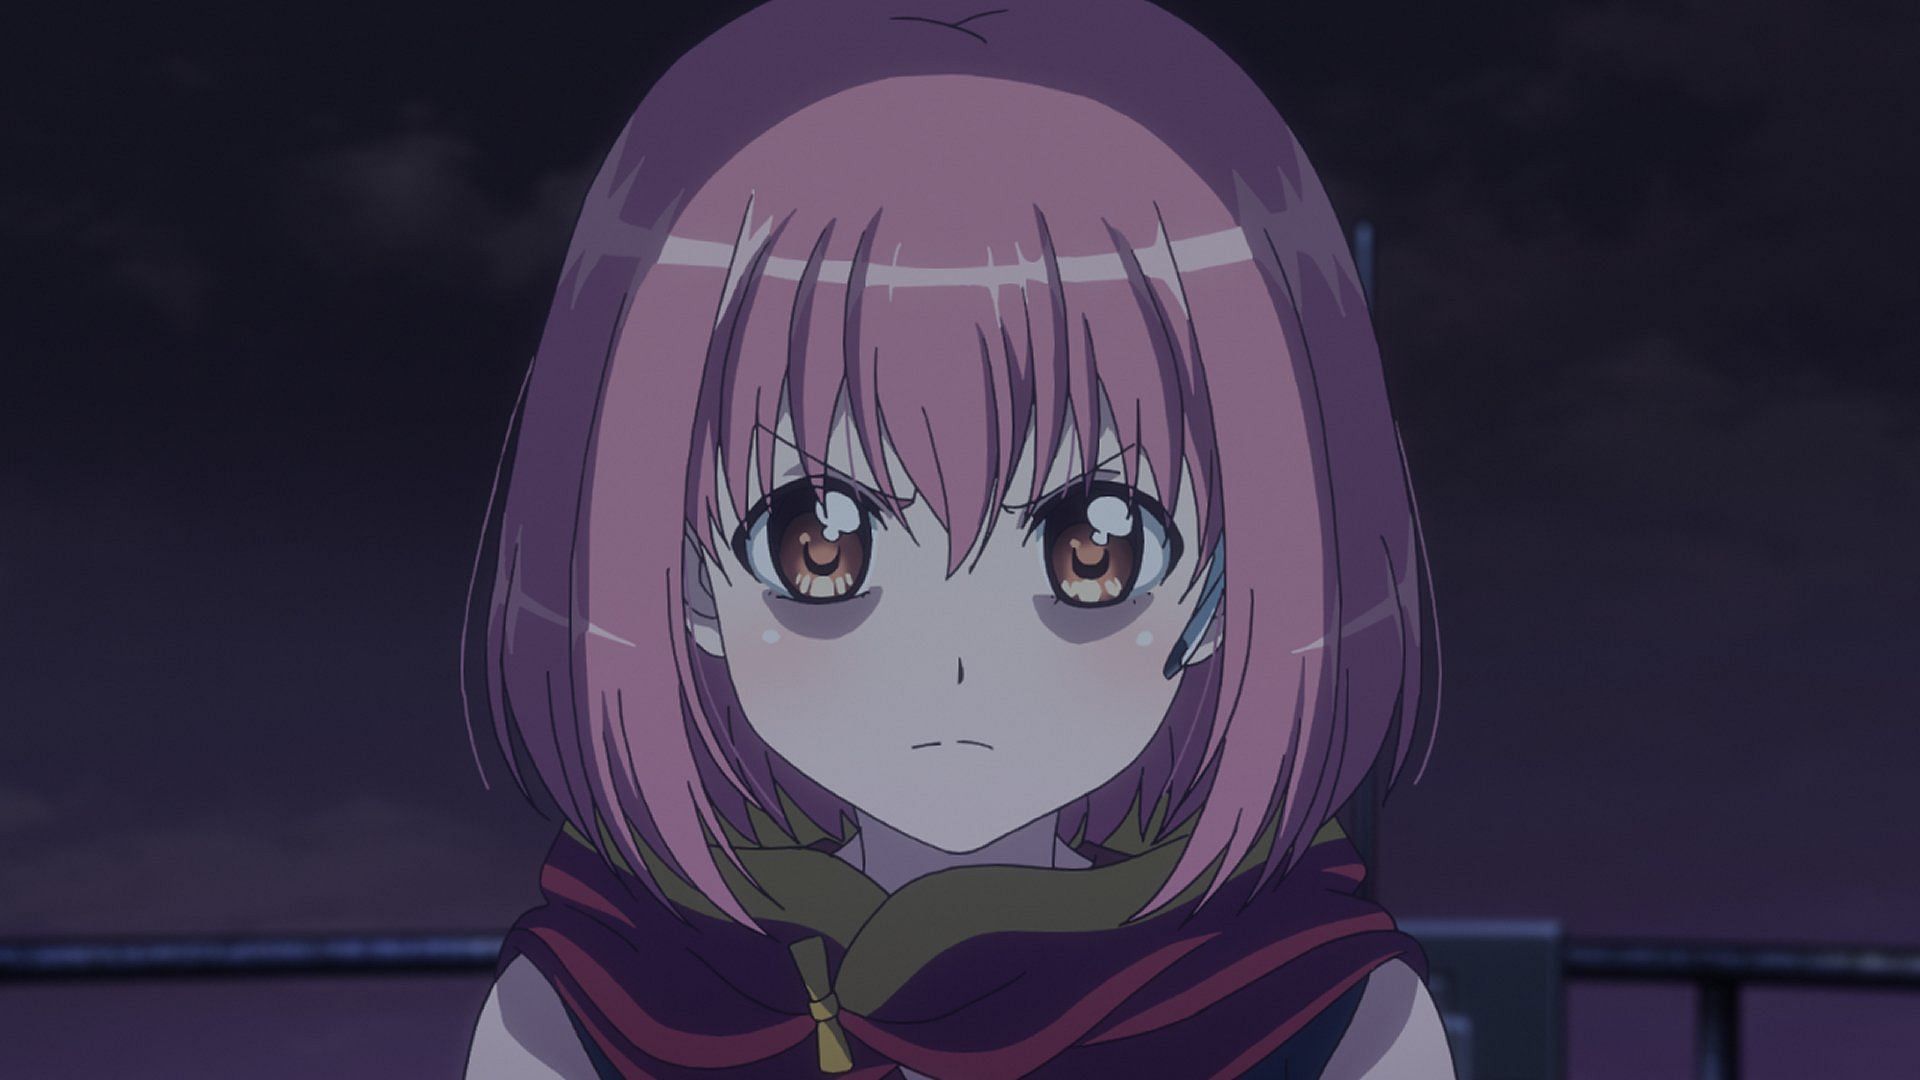 Momo as seen in the show (Image via Studio Lay-duce)